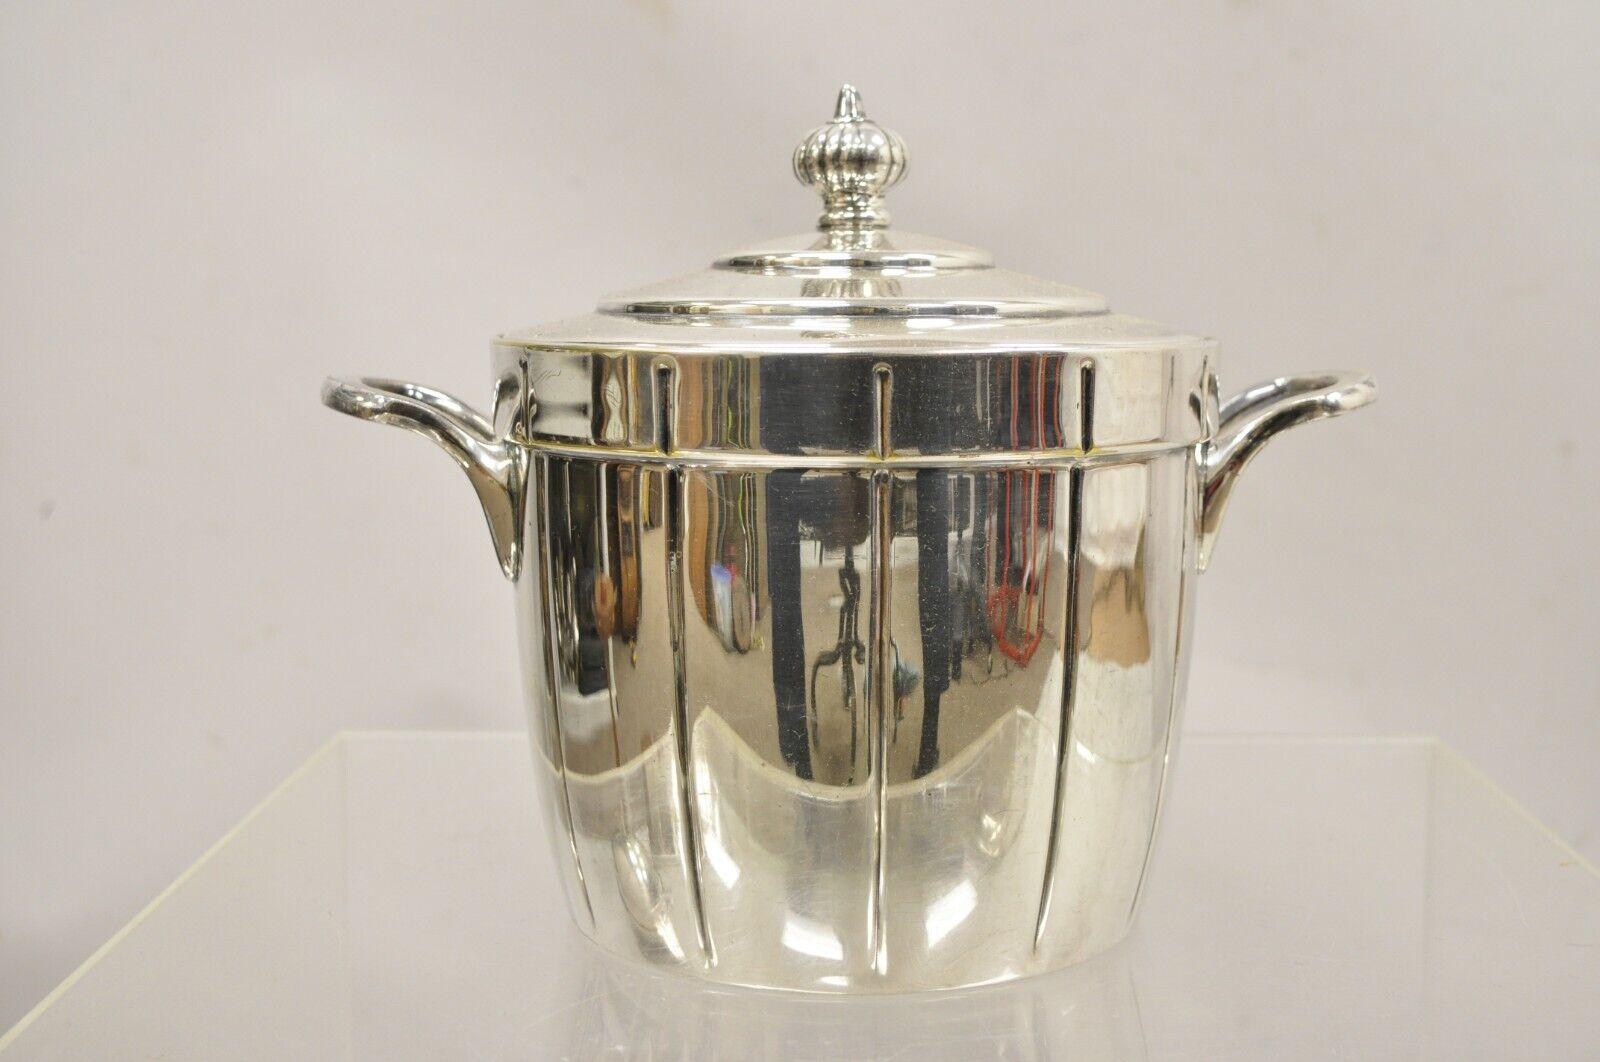 Vintage Manning-Bowman & Co Modern Silver Plated Lidded Ice Bucket with Glass Lined Interior. Circa Mid 20th Century. Measurements:  8.5